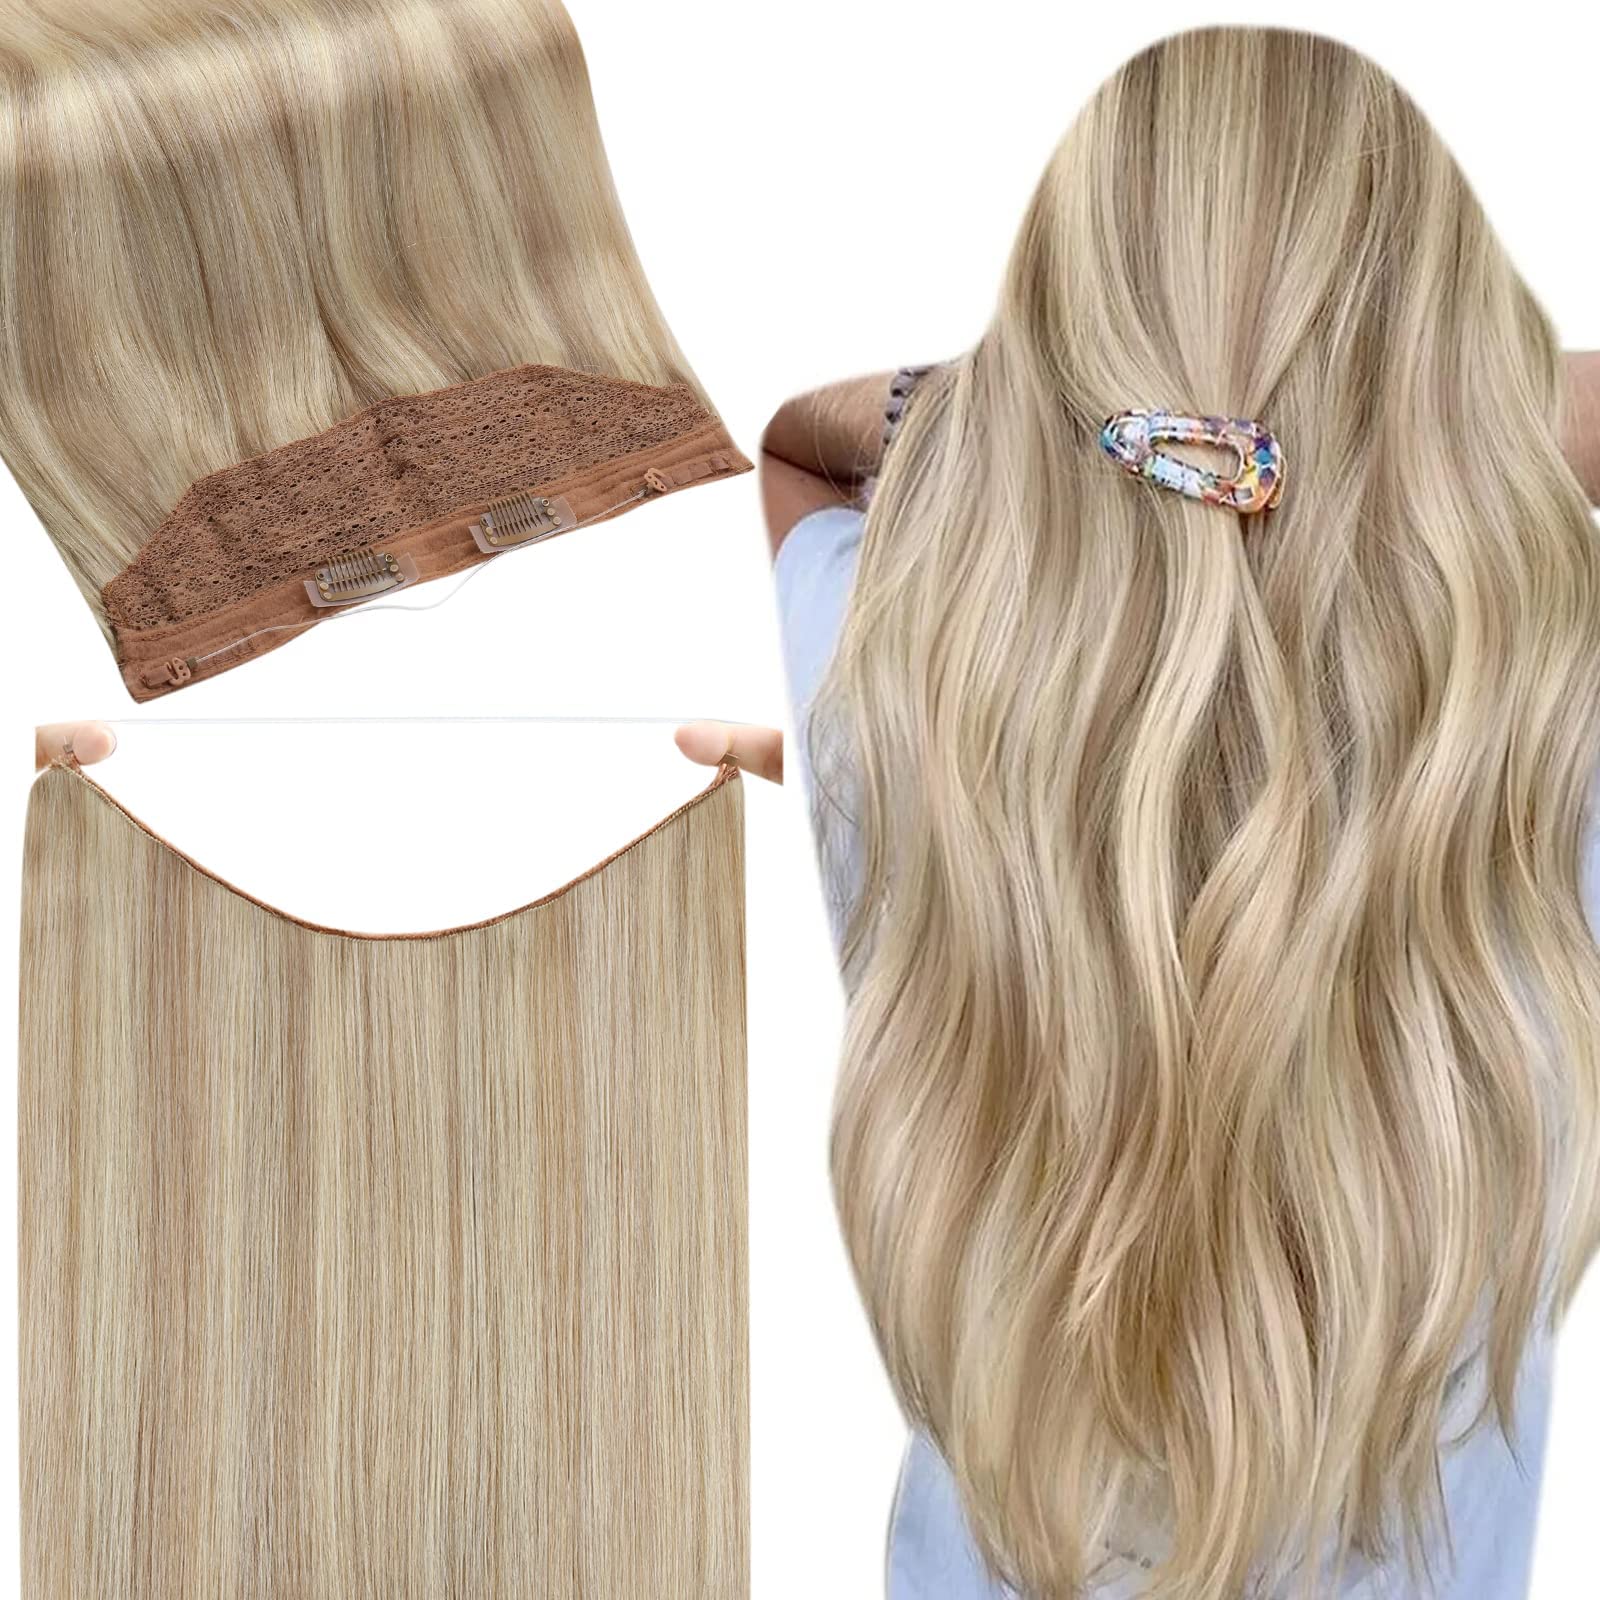 Fshine Invisible Wire Hair Extensions Secret Hairpieces Fish Wire Layered Hair Extensions Human Hair Ash Blonde 18 Highlight Blonde 613 Invisible Hair Extensions Removable Clips 80Gram 16 Inch